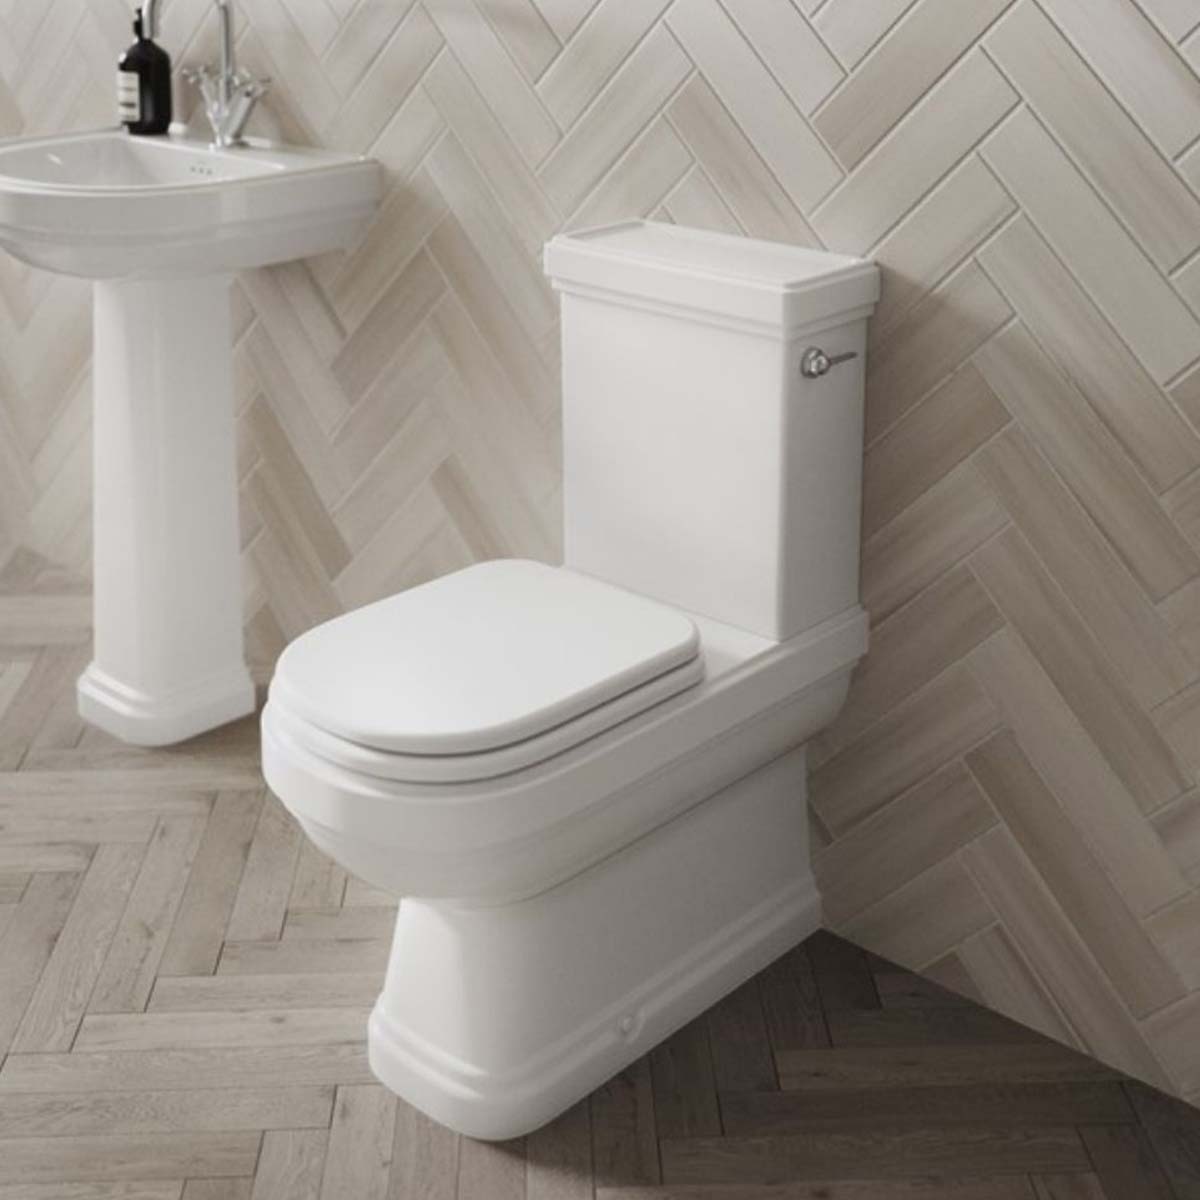 burlington riviera close coupled full back to wall wc toilet lifestyle Deluxe Bathrooms UK